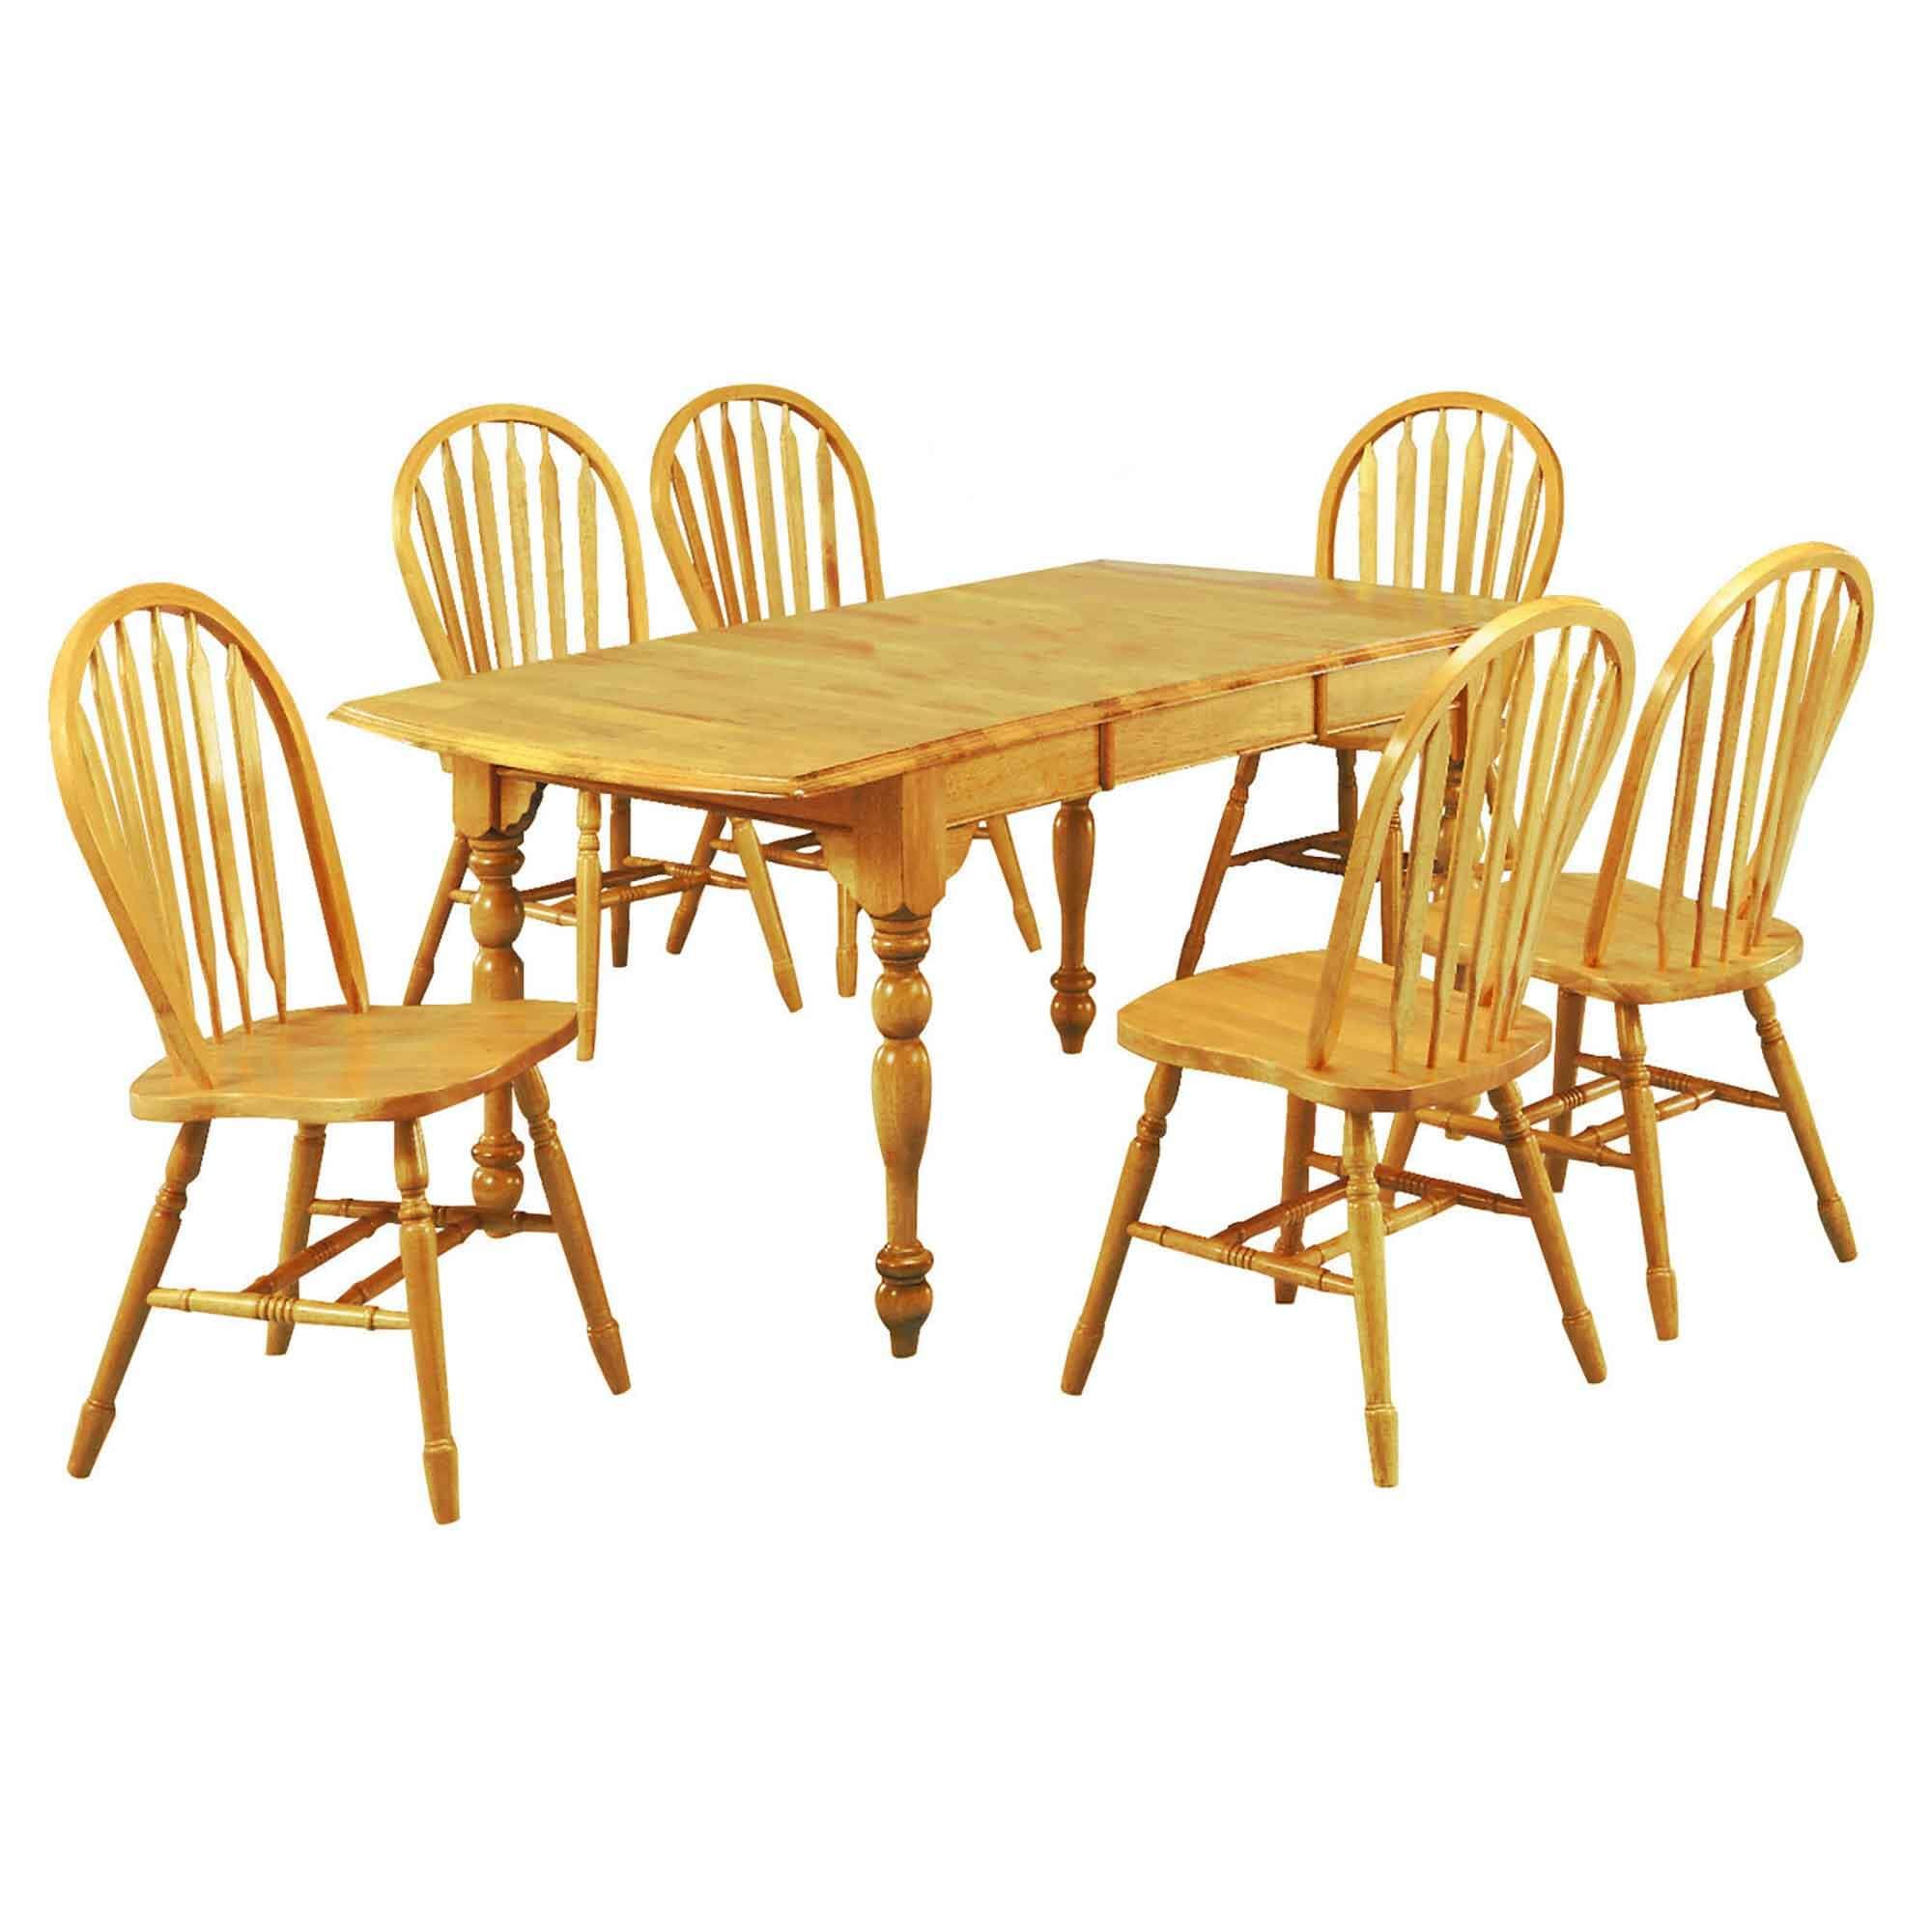 Drop Leaf Extendable Dining Set W/Arrowback Chairs (7 Piece) | Sunset Pertaining To 7 Piece Extendable Dining Sets (View 14 of 15)